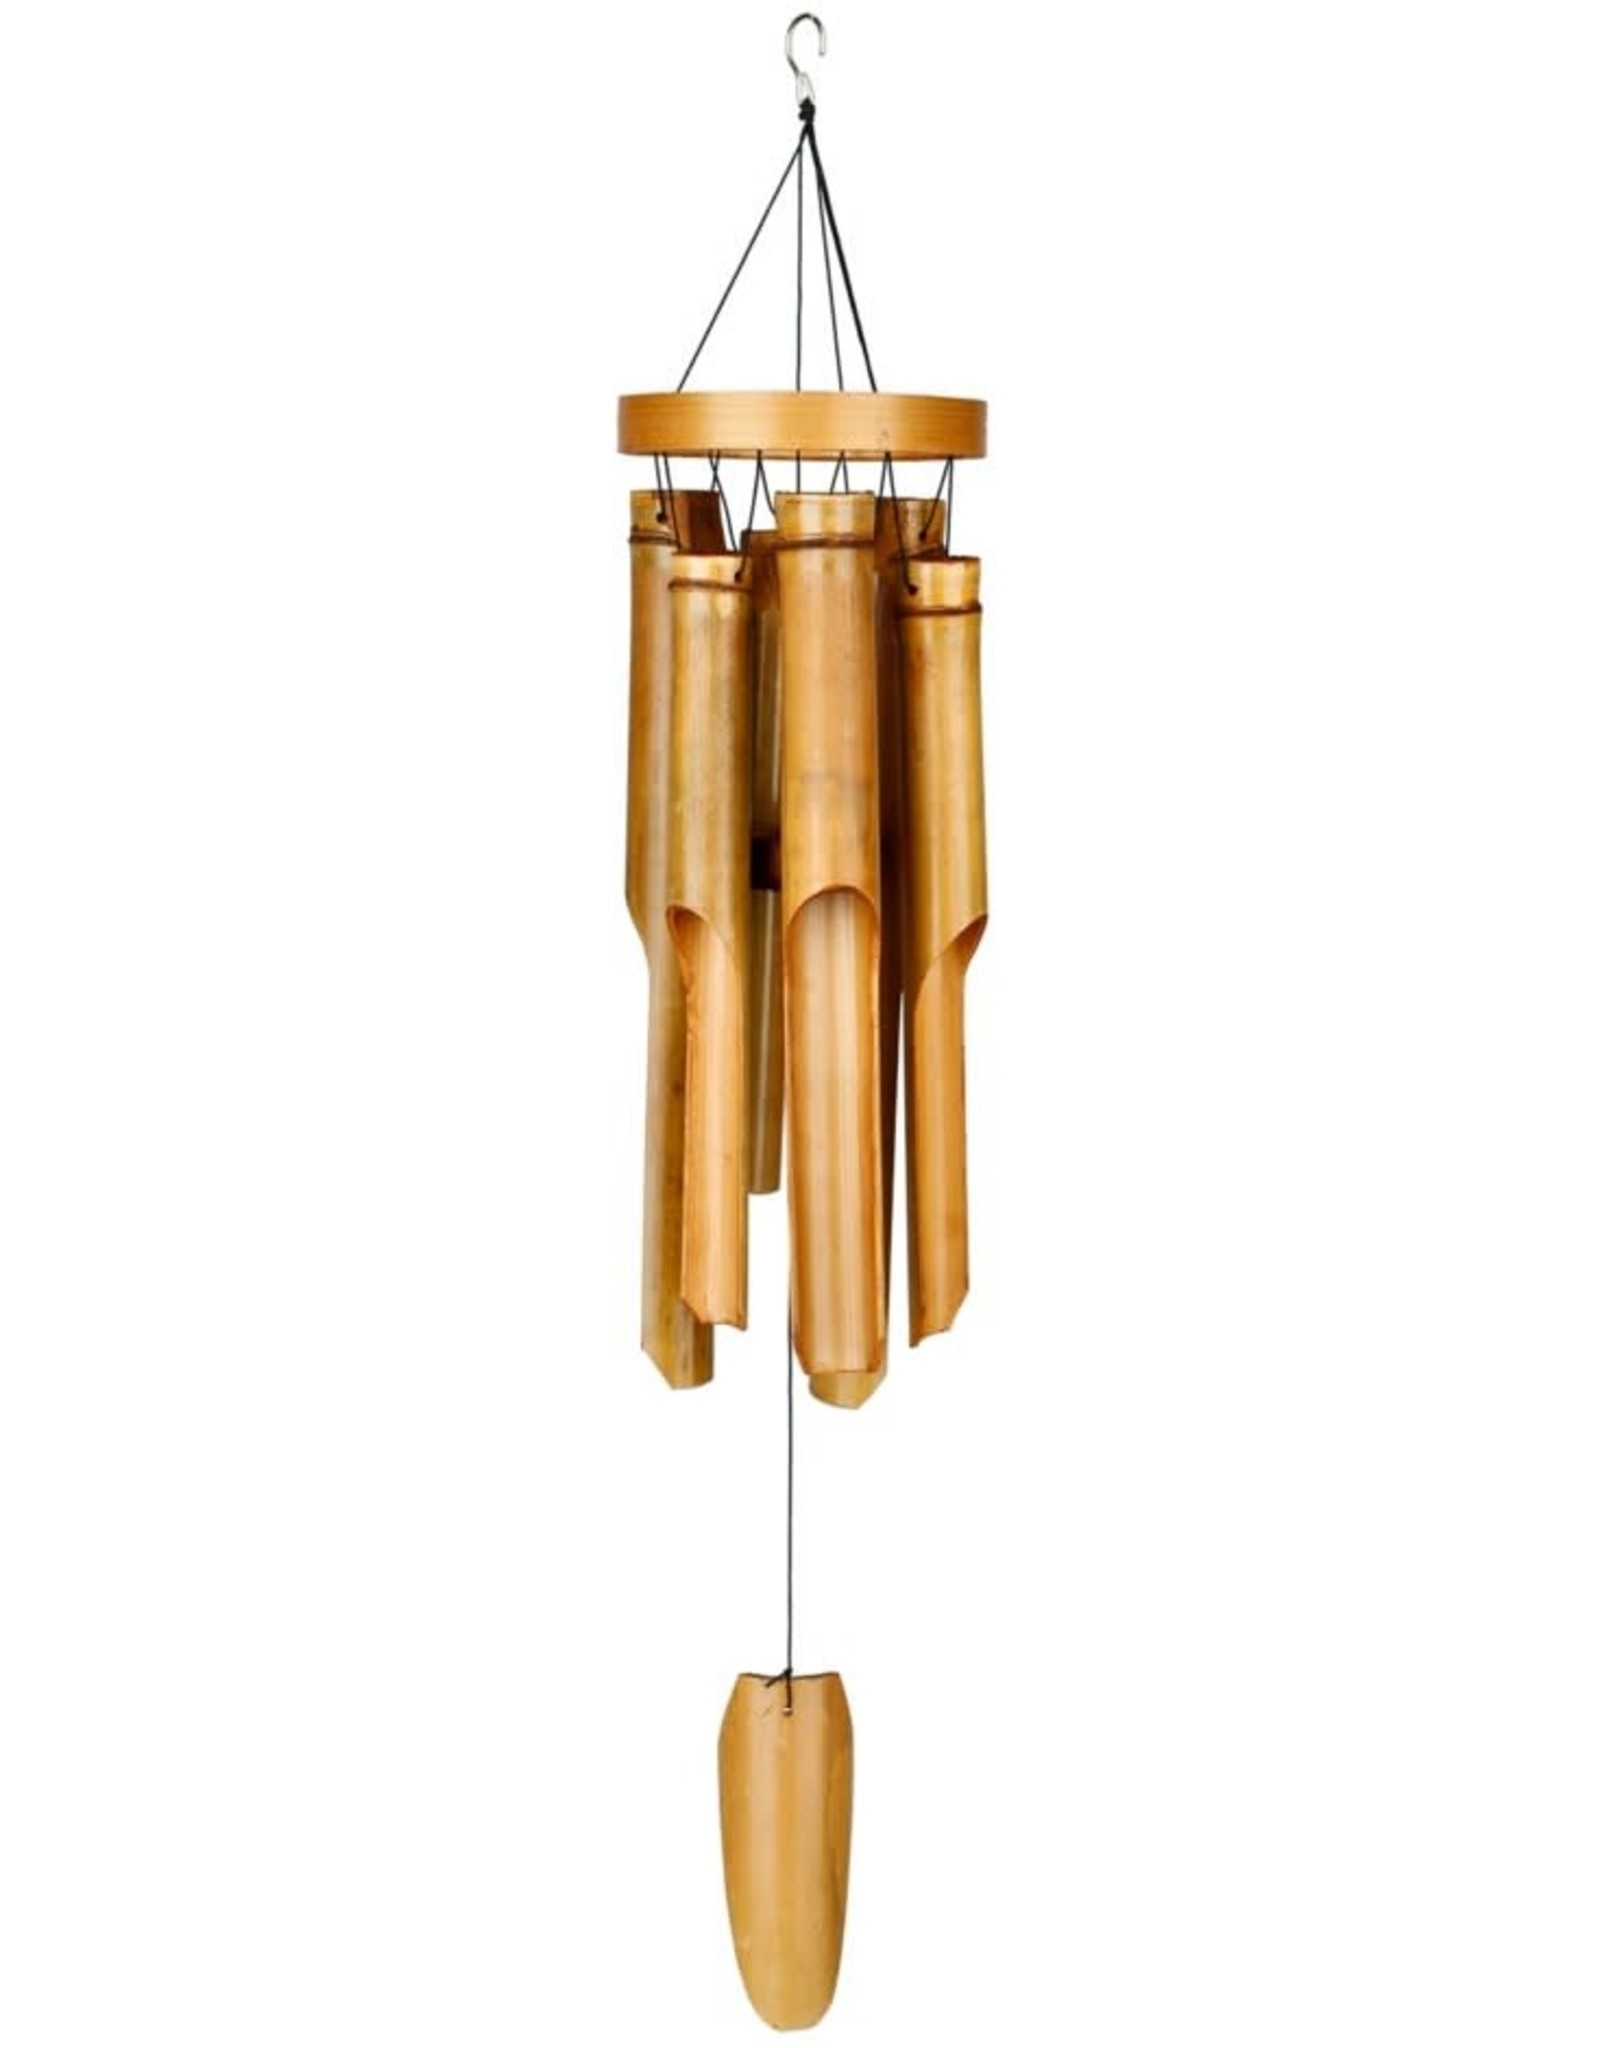 Woodstock chimes CFC255 Natural Ring Bamboo Chime -Large